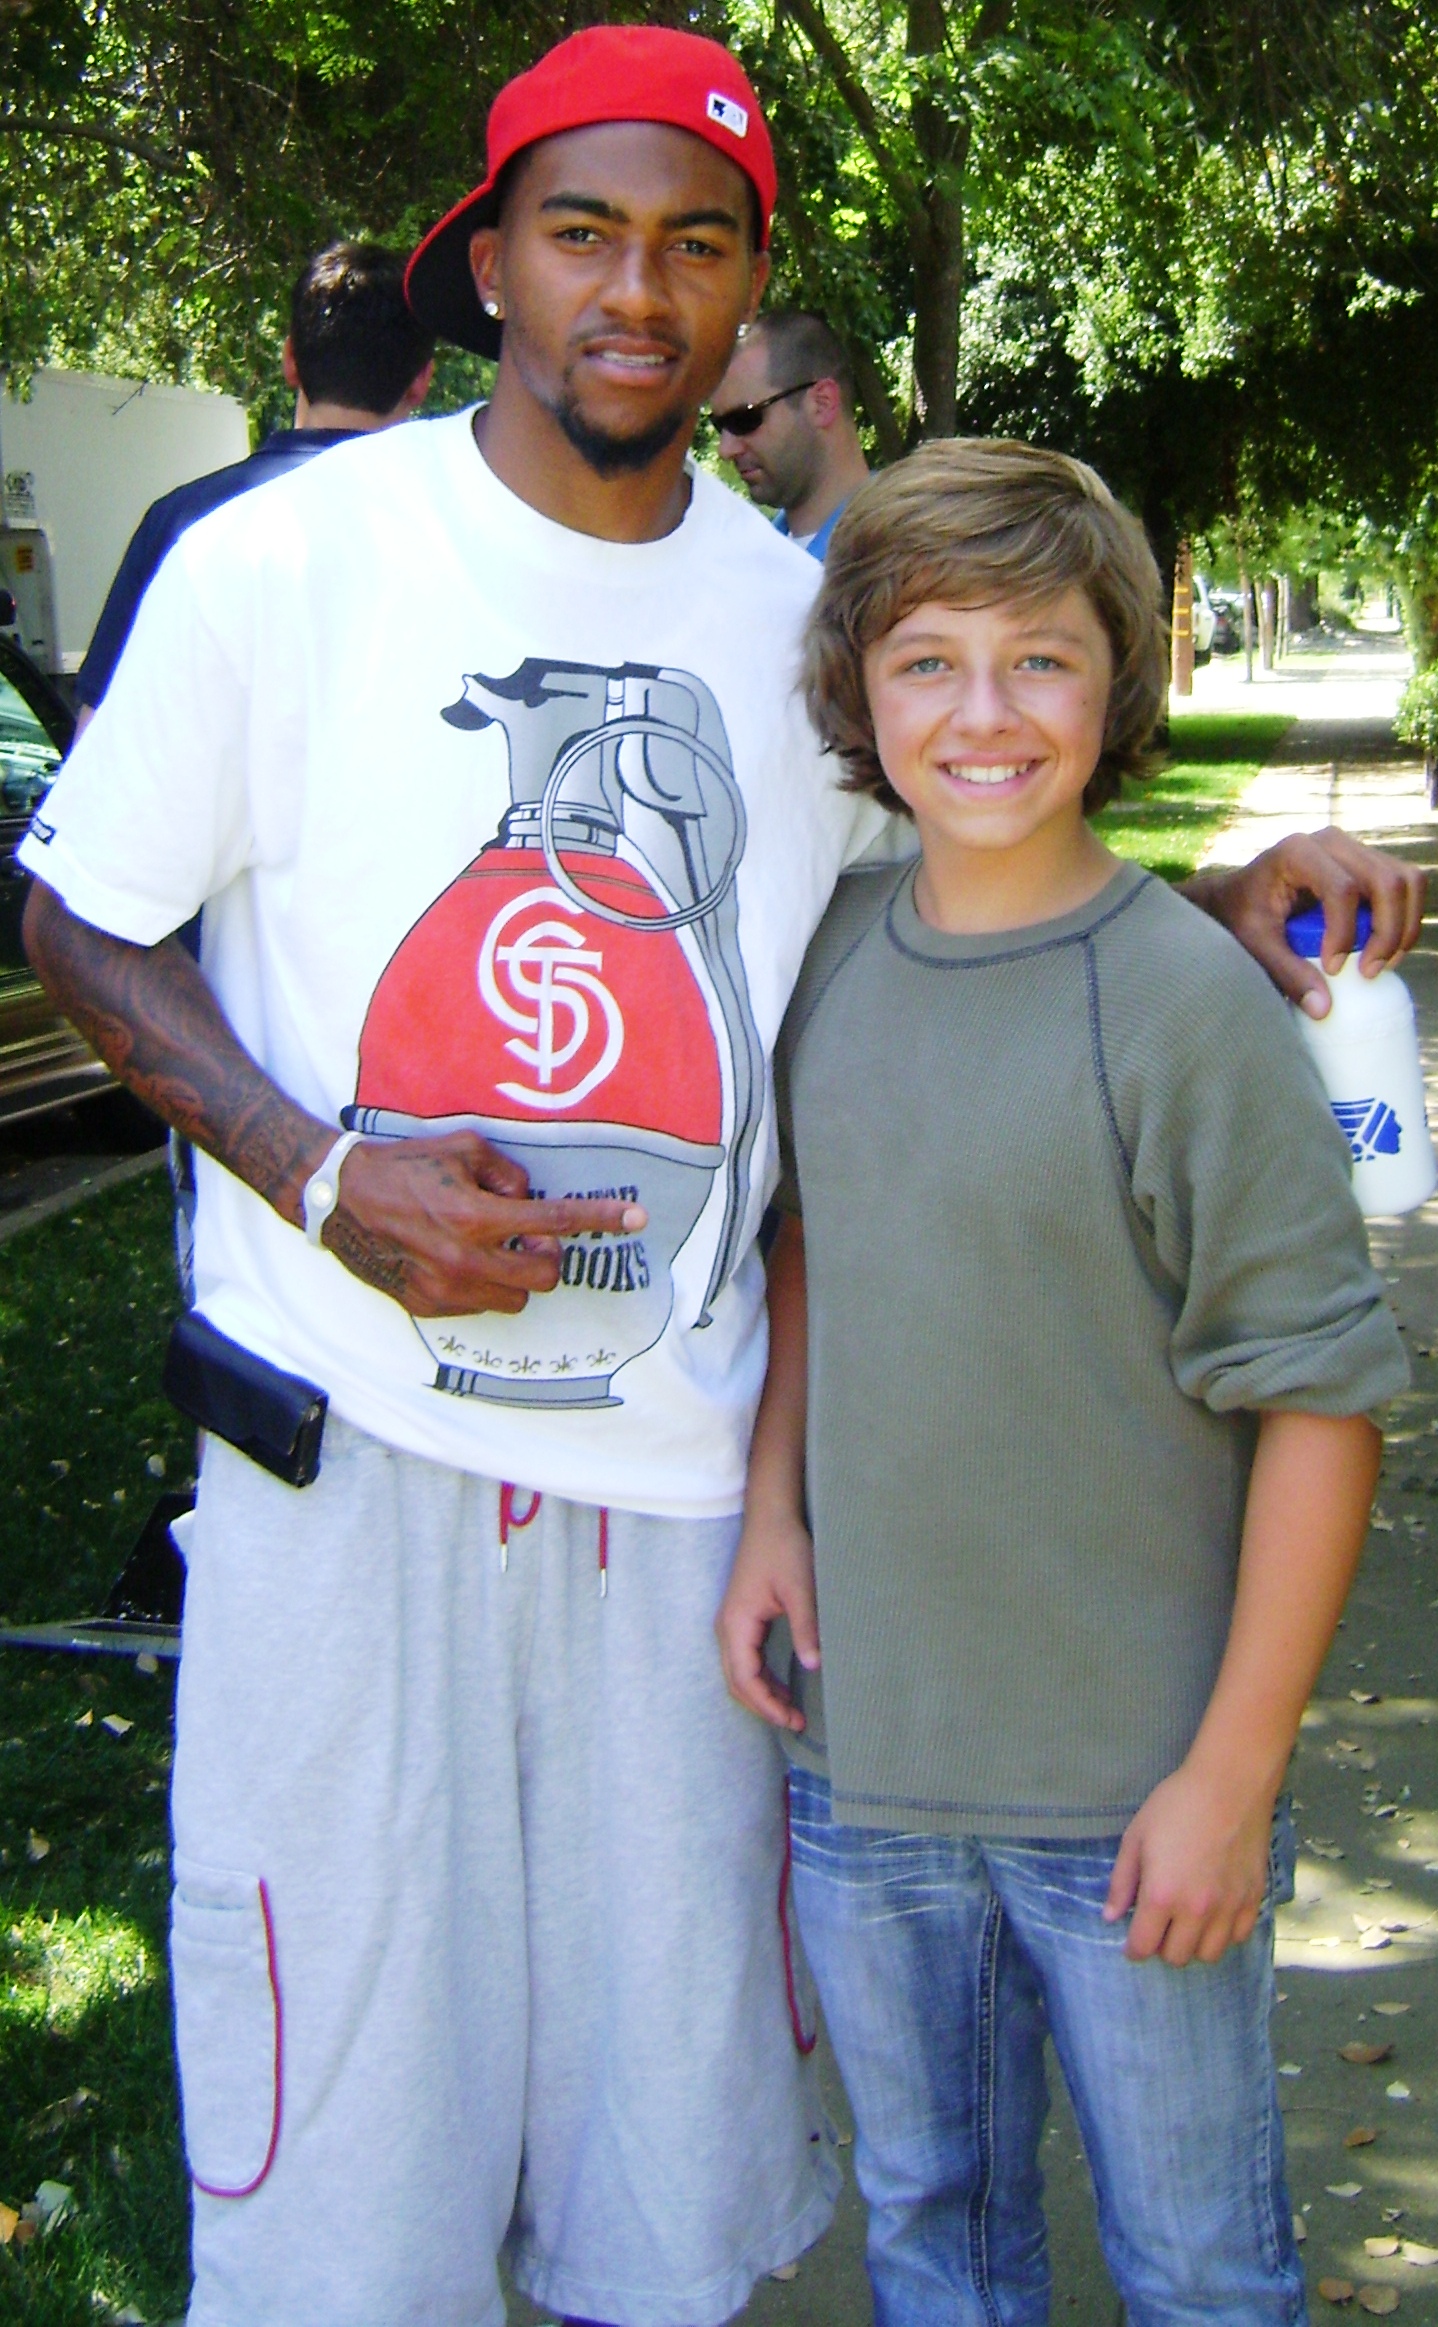 Austin with NFL Football Player, Deshawn Jackson, on the set of the ESPN NFL National Commercial